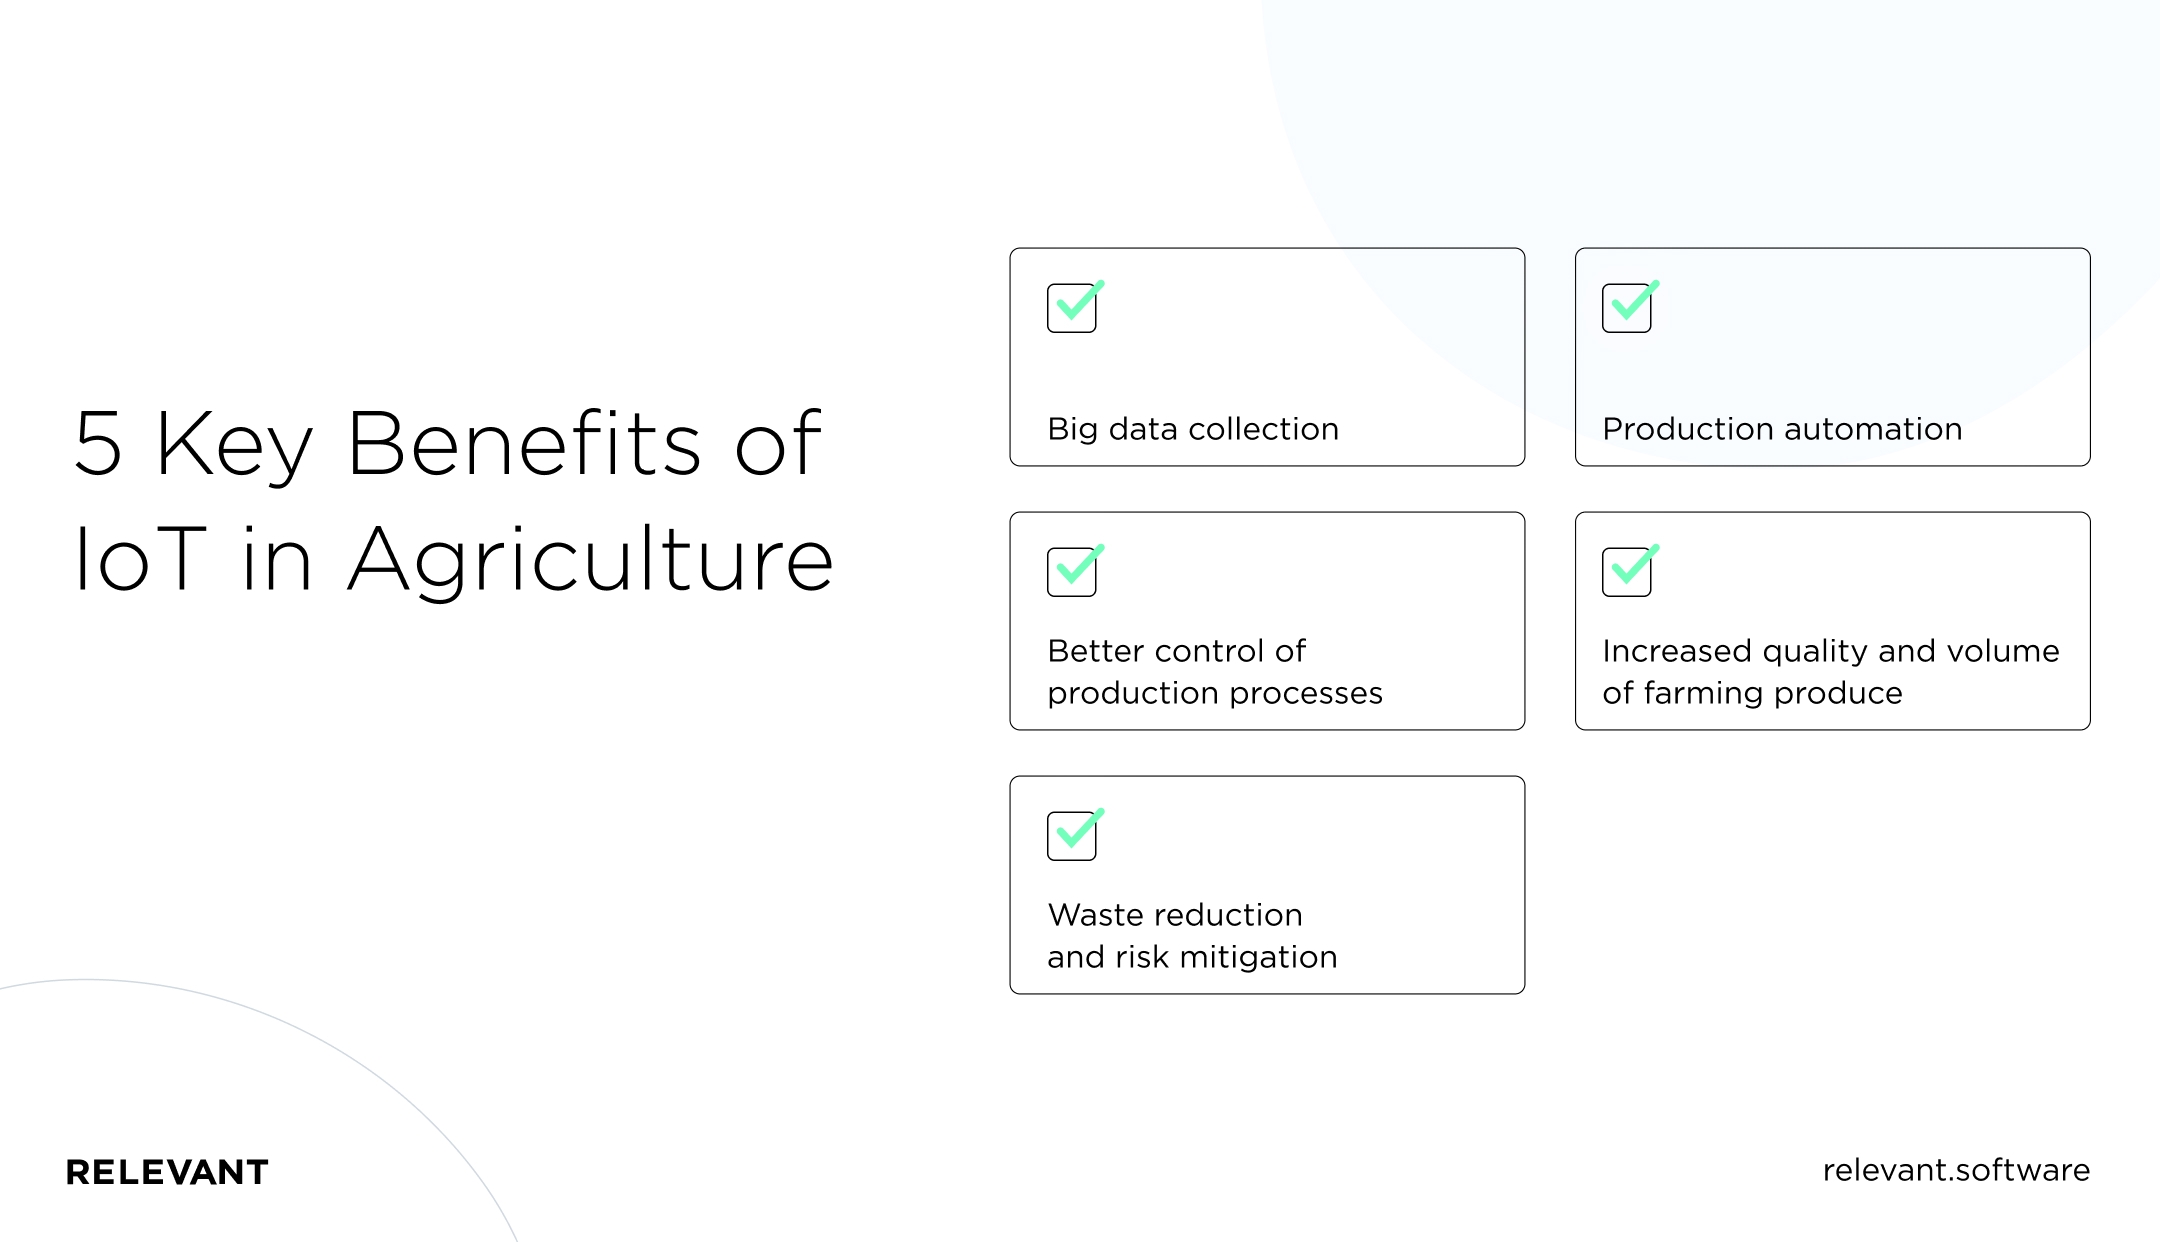 5 Key Benefits of IoT in Agriculture